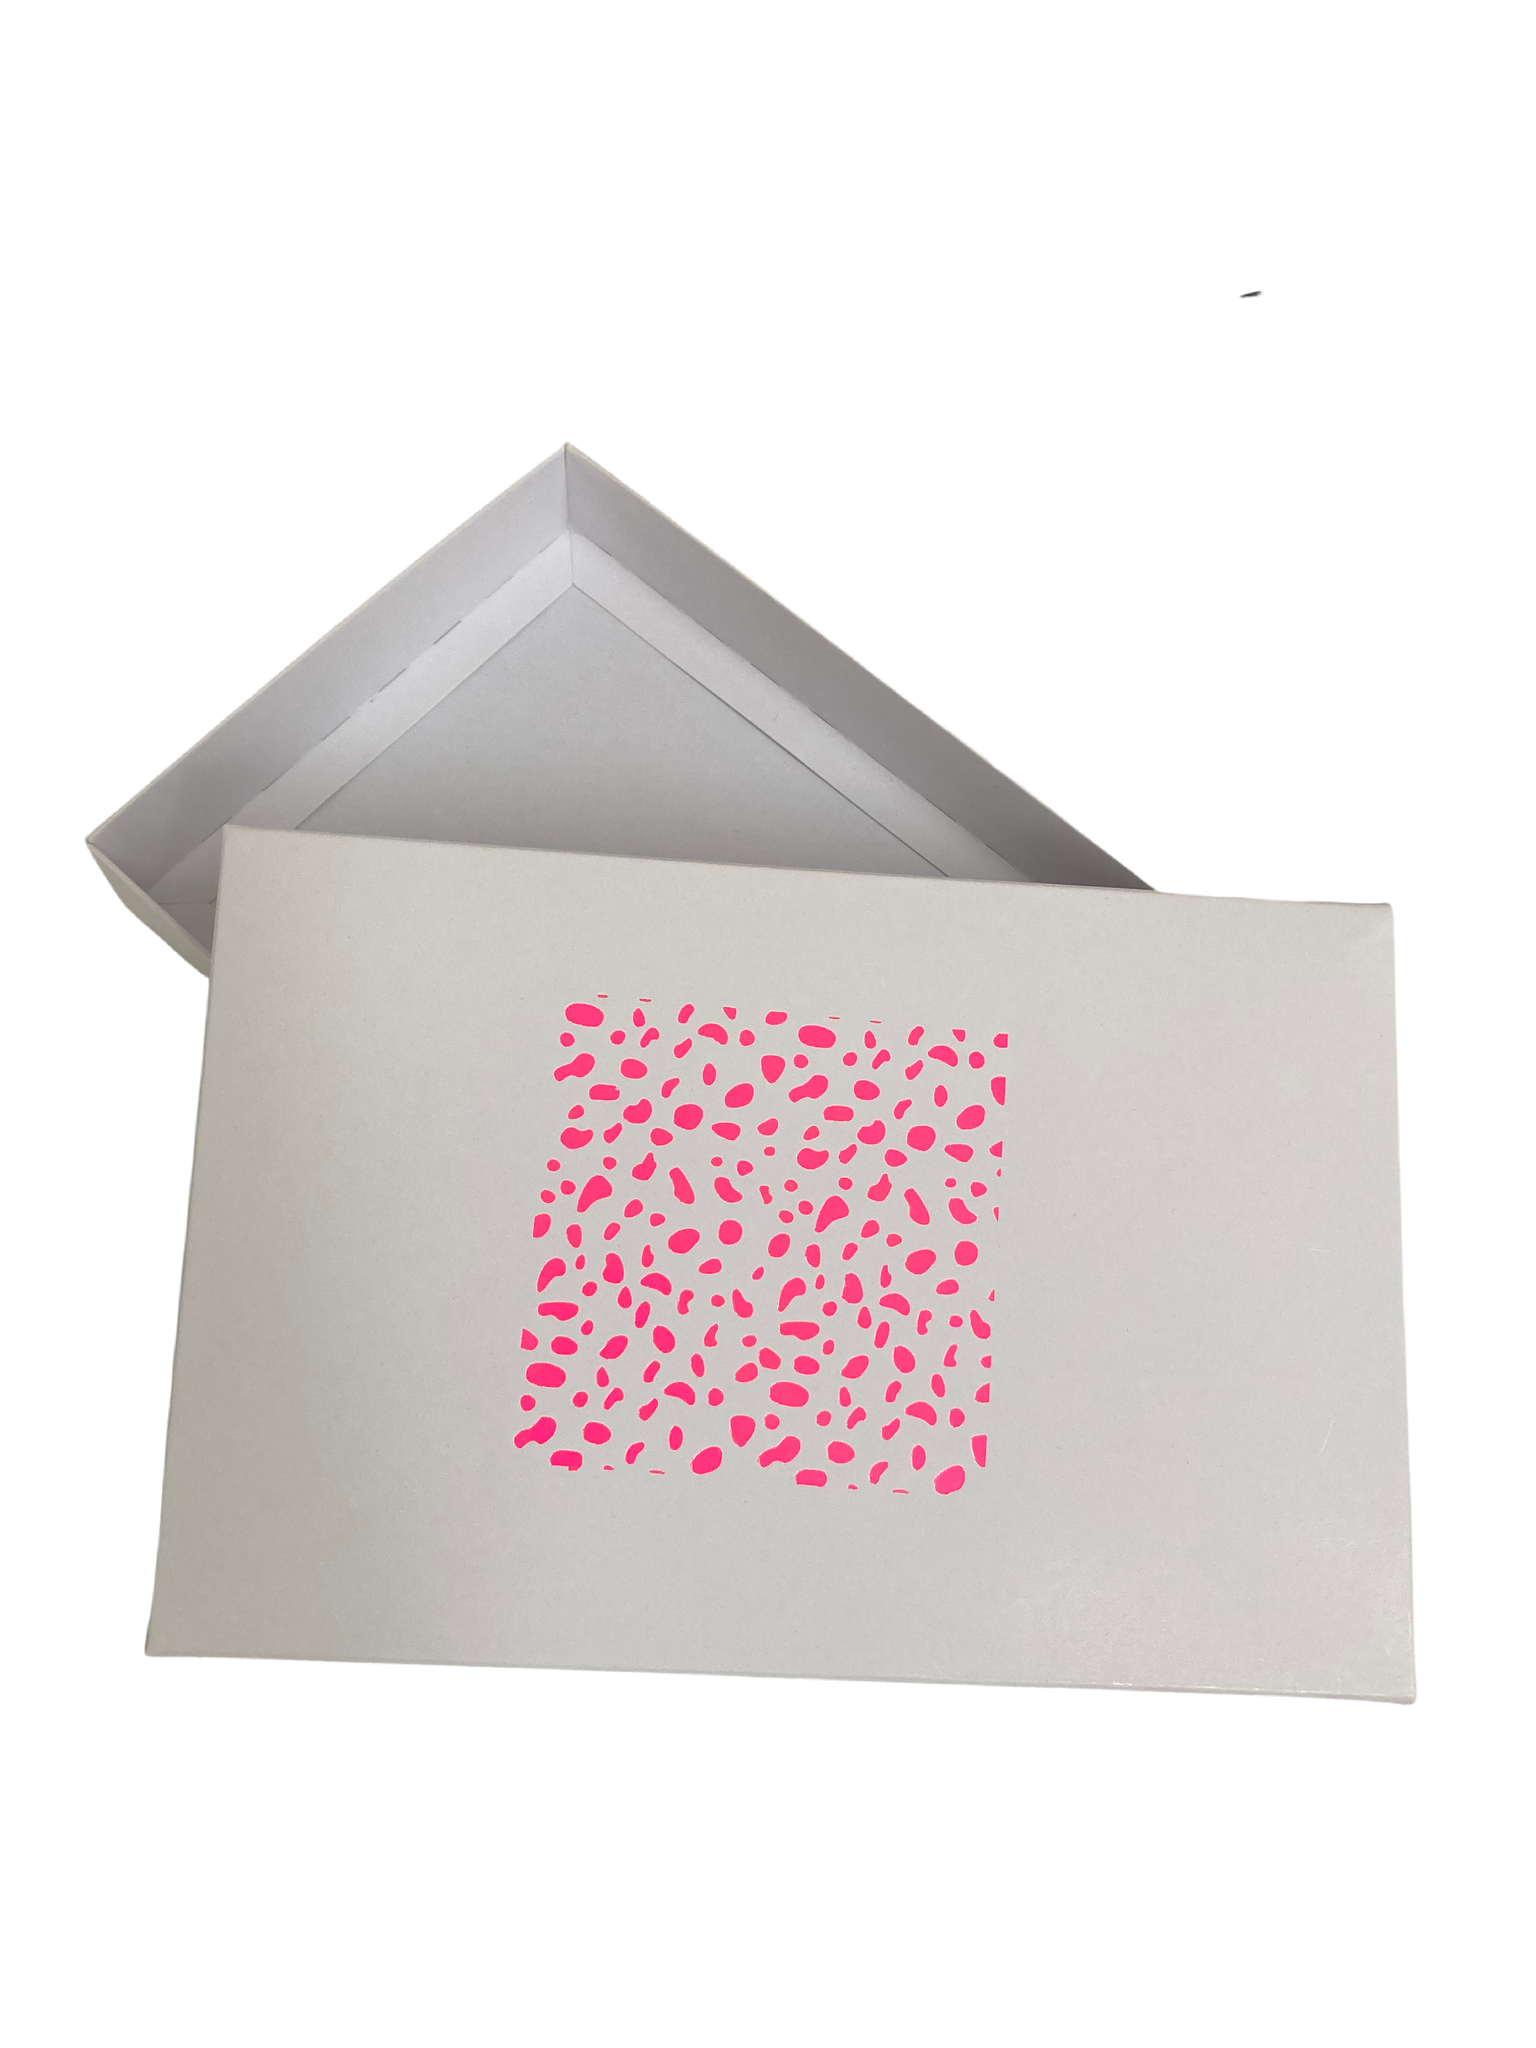 NEON PINK DALMATION SPOT SOLID WHITE LID GIFT BOX BLANK 240x155x30mm